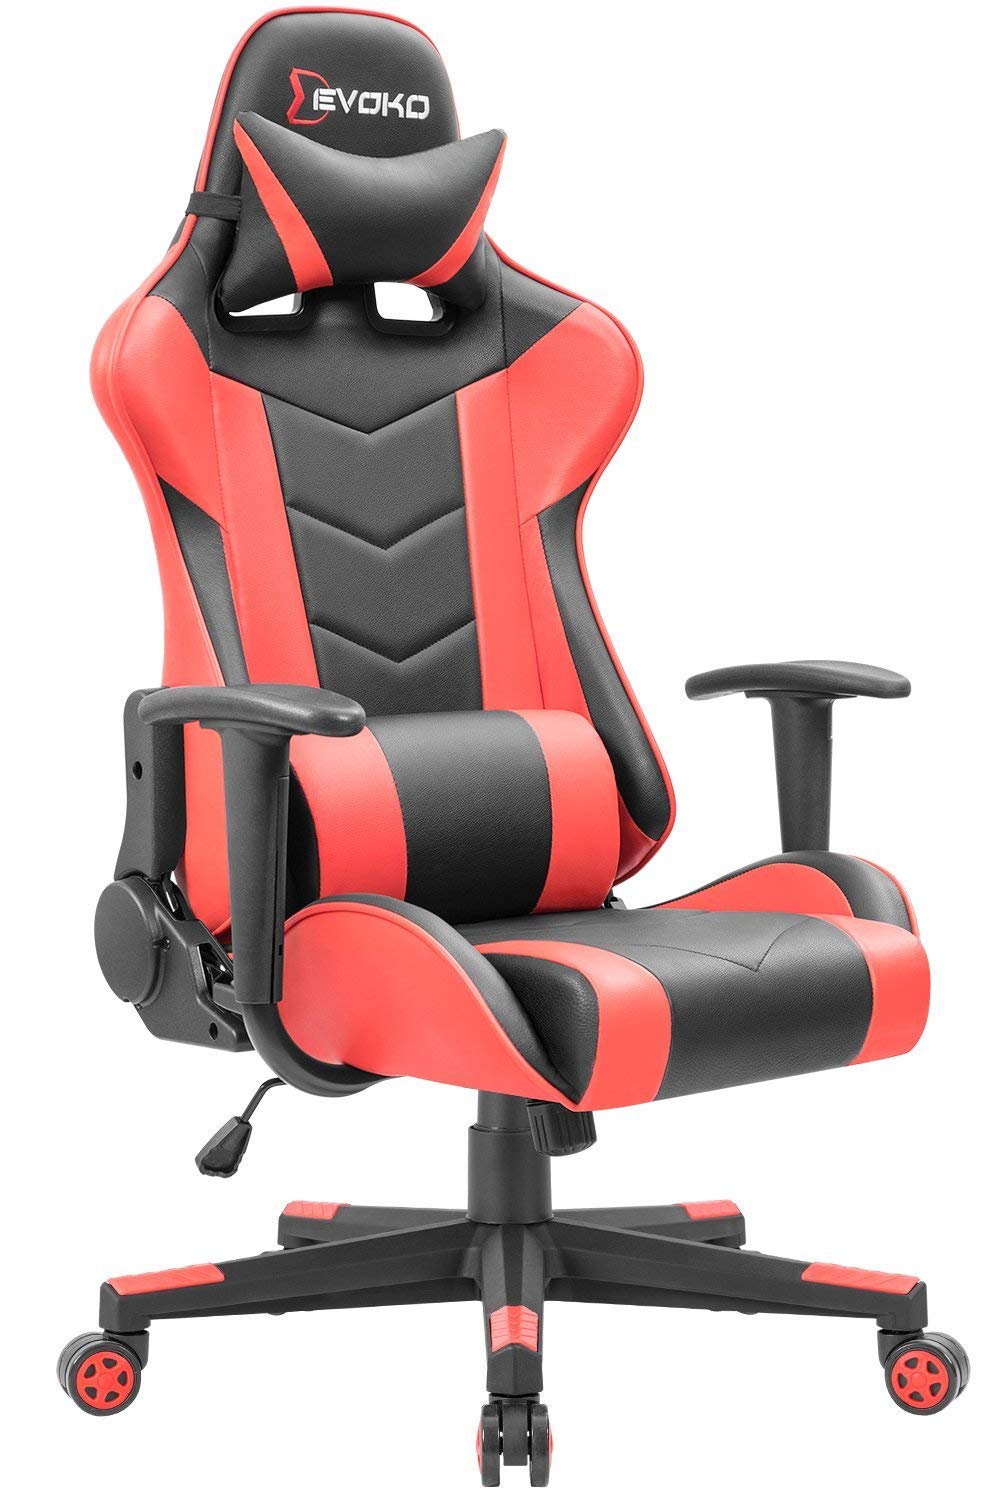 The Best Amazon Gaming Chair - A Full Review - Ultimate ...